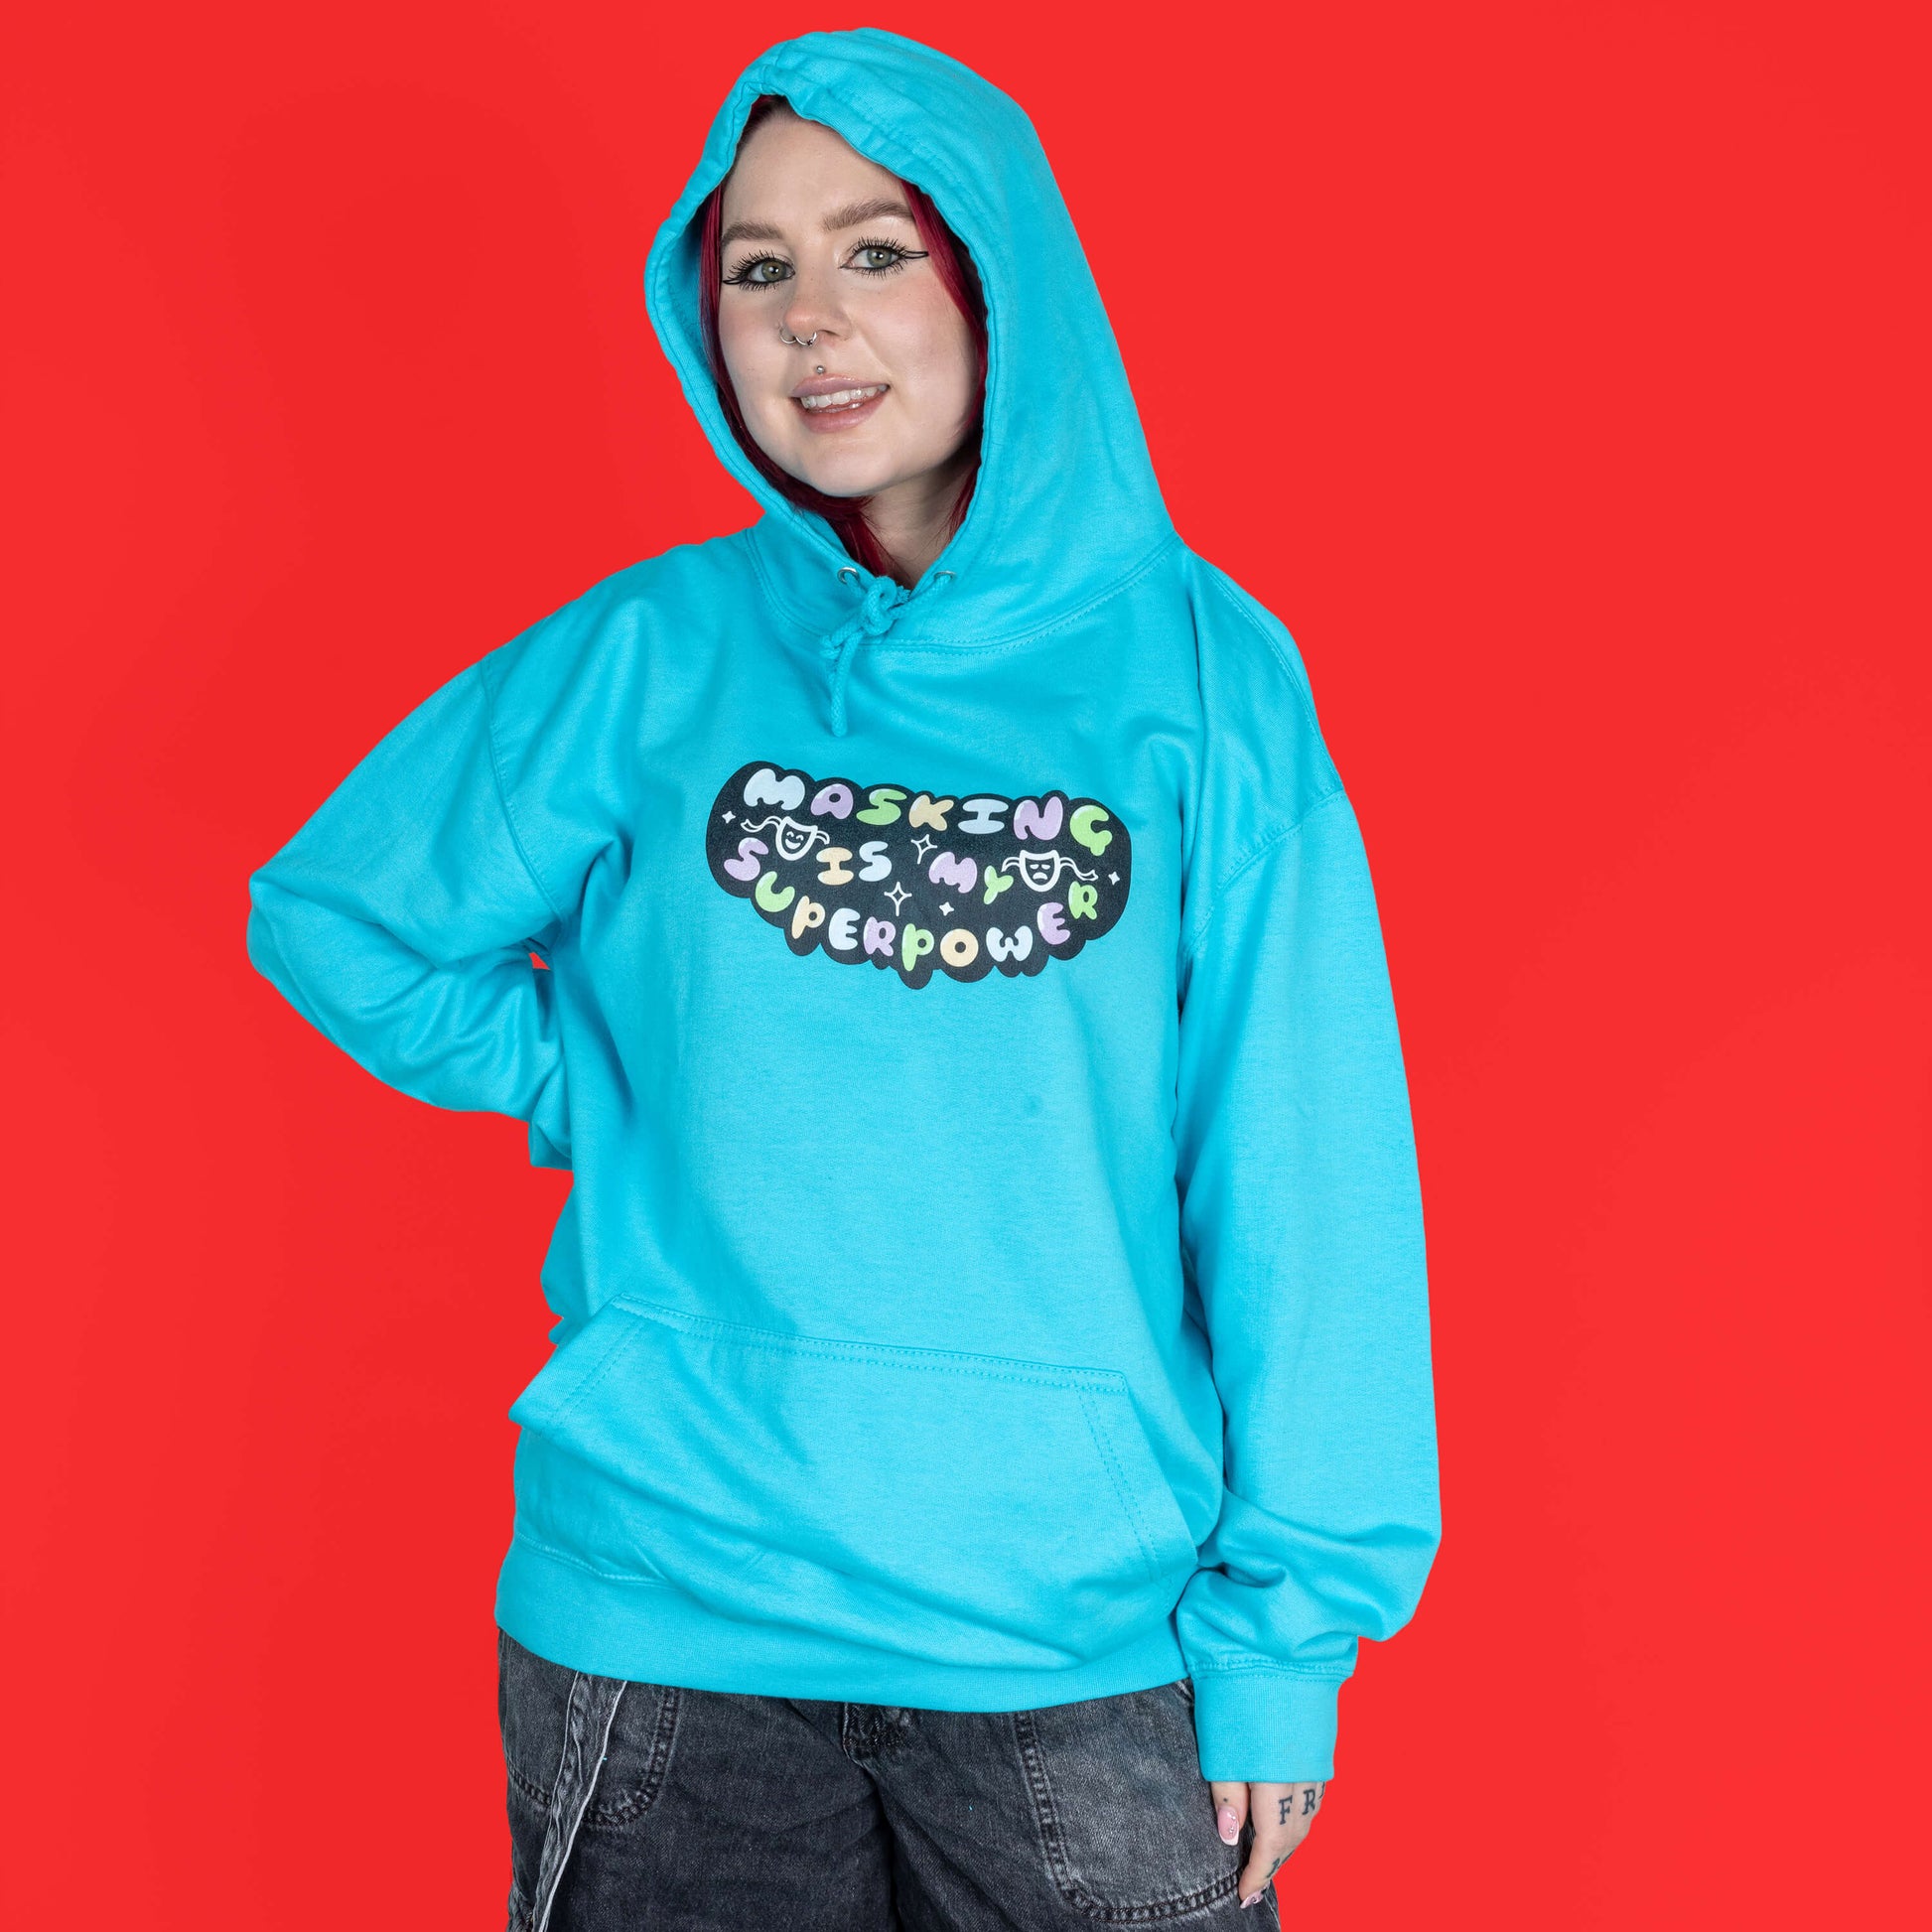 The Masking Is My Super Power Hoodie in Turquoise Surf modelled by Flo with red hair and black eyeliner on a red background. She is facing forward smiling with the hood up and one hand on her hip. The aqua blue hoodie features pastel rainbow bubble writing that reads 'masking is my superpower' with white sparkles, a happy and sad drama masks all on a black oval. Raising awareness for neurodivergent people with ADHD or Autism.